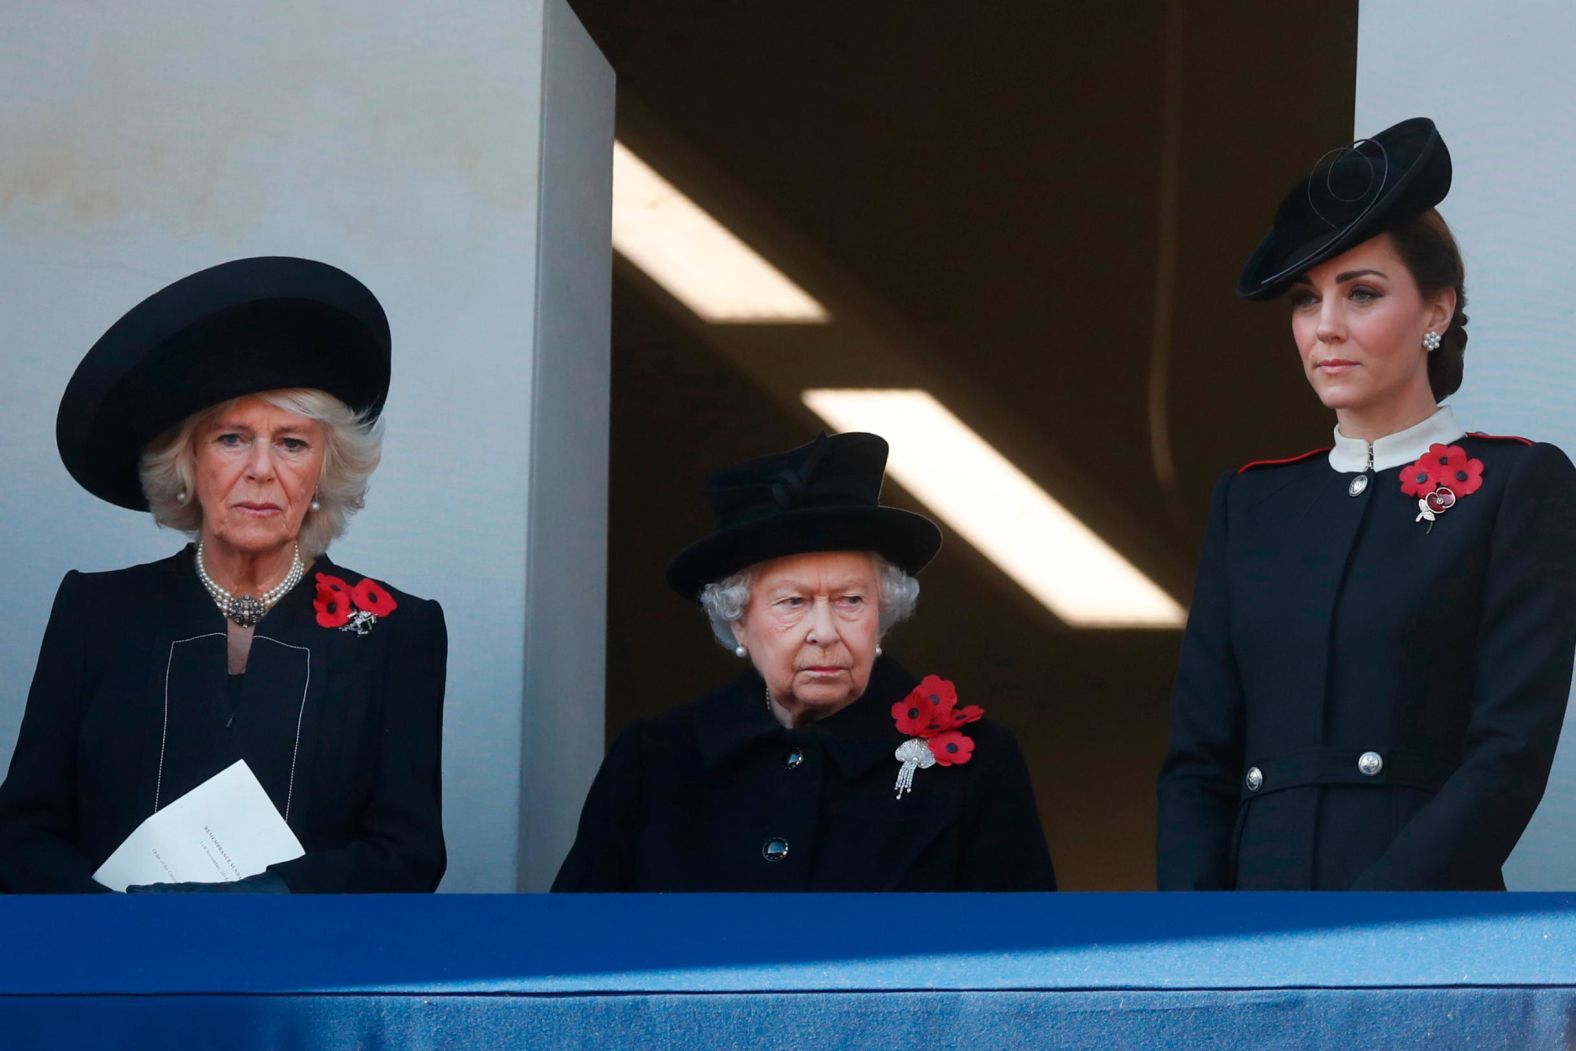 Britain's Queen Elizabeth II, center, Camilla, Duchess of Cornwall, and Kate, Duchess of Cambridge, right, attend the Remembrance Sunday ceremony at the Cenotaph in London. Remembrance Sunday each year commemorates veterans of military conflicts. 